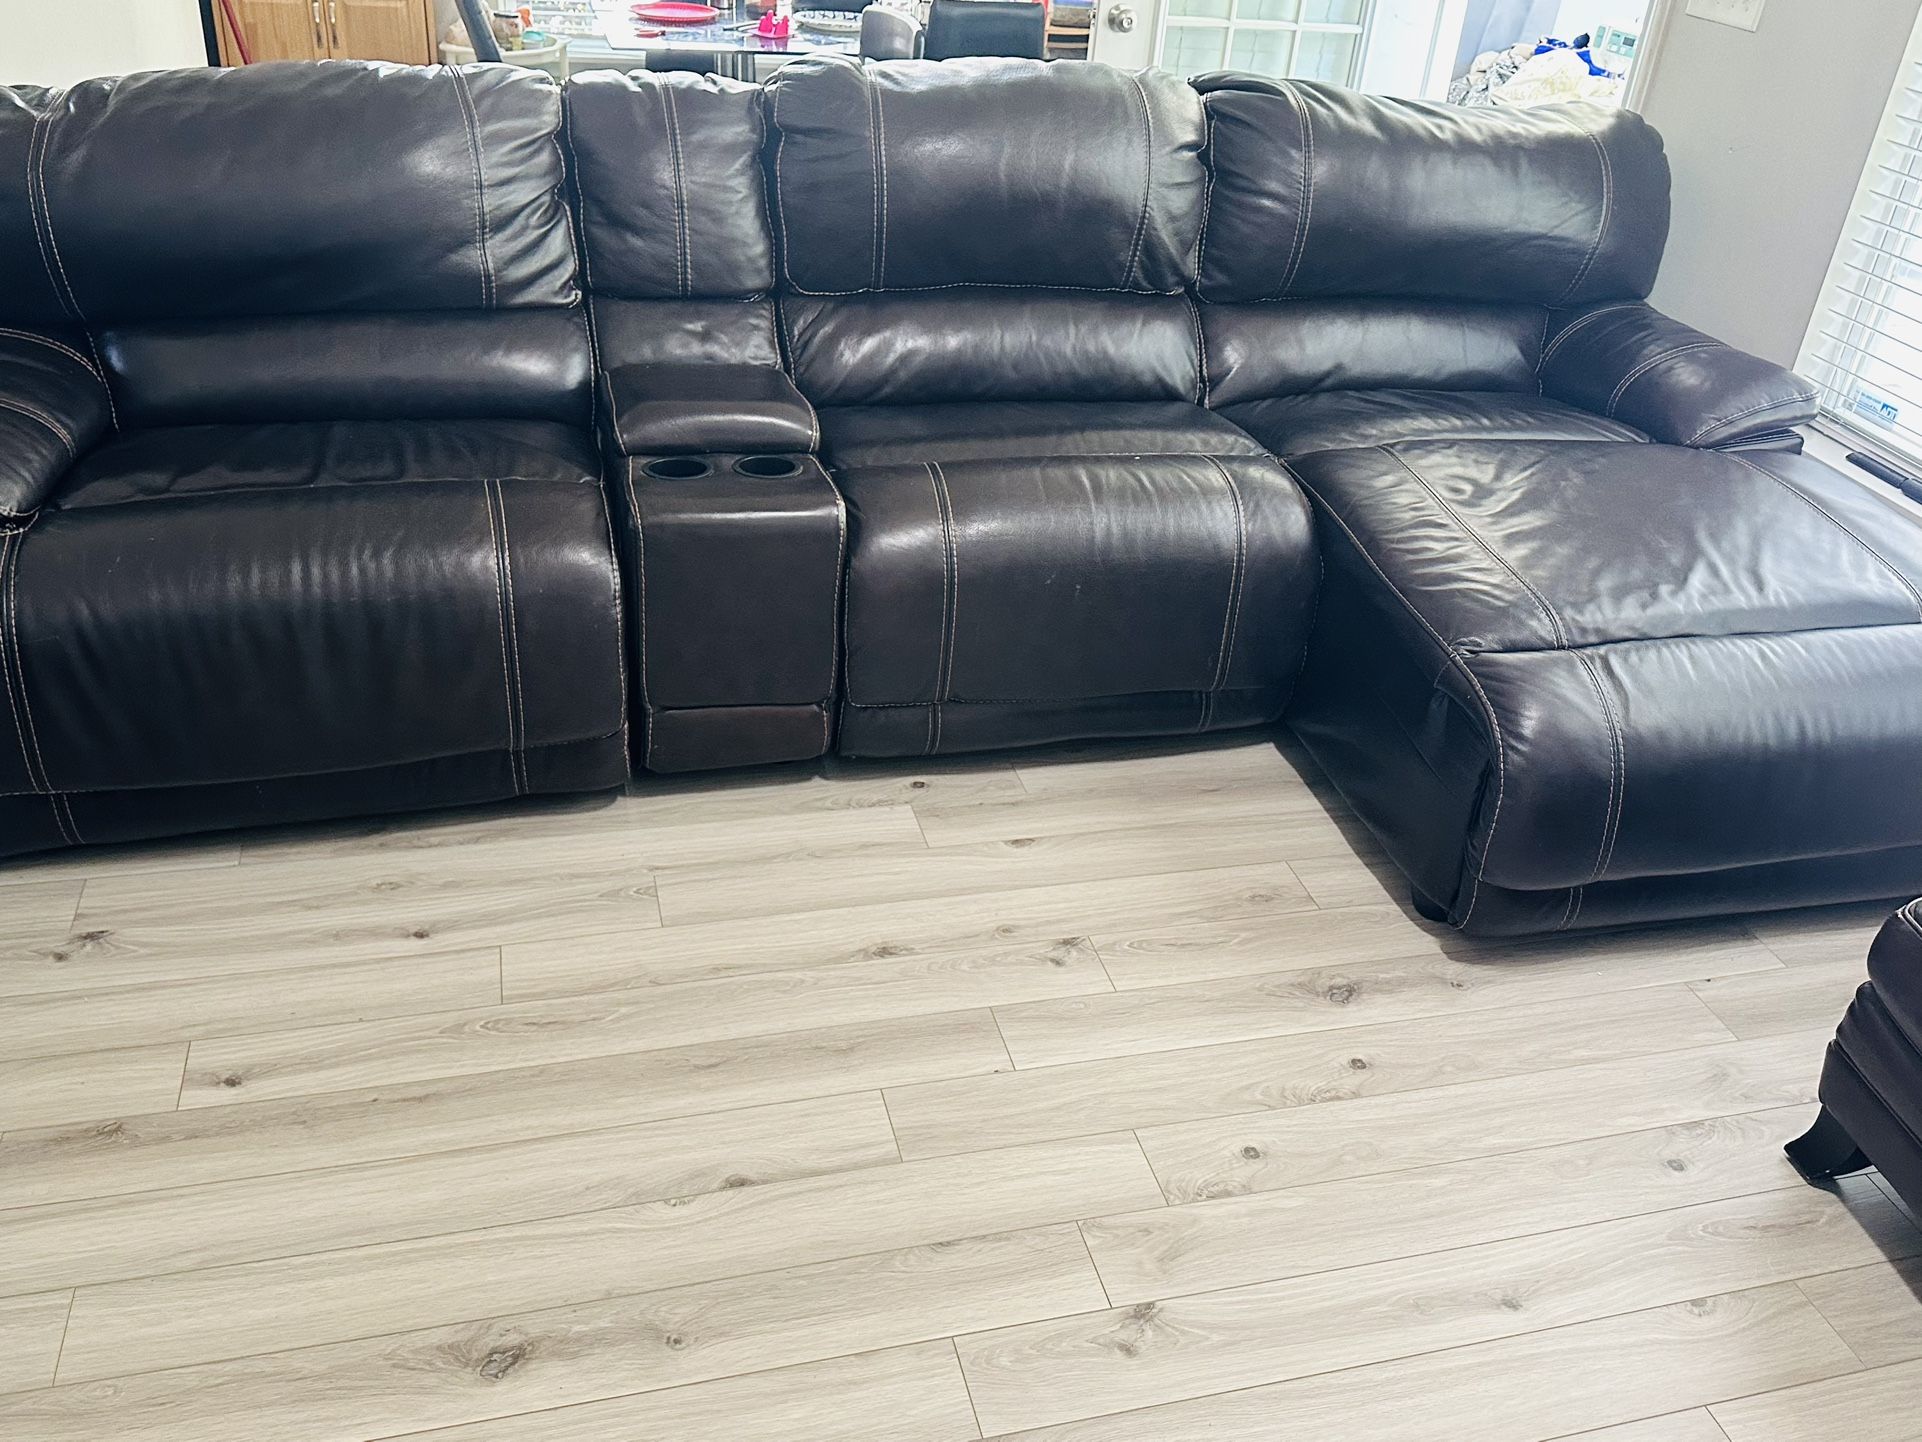 Pure leather recliner sofa with extra leather chair and ottoman